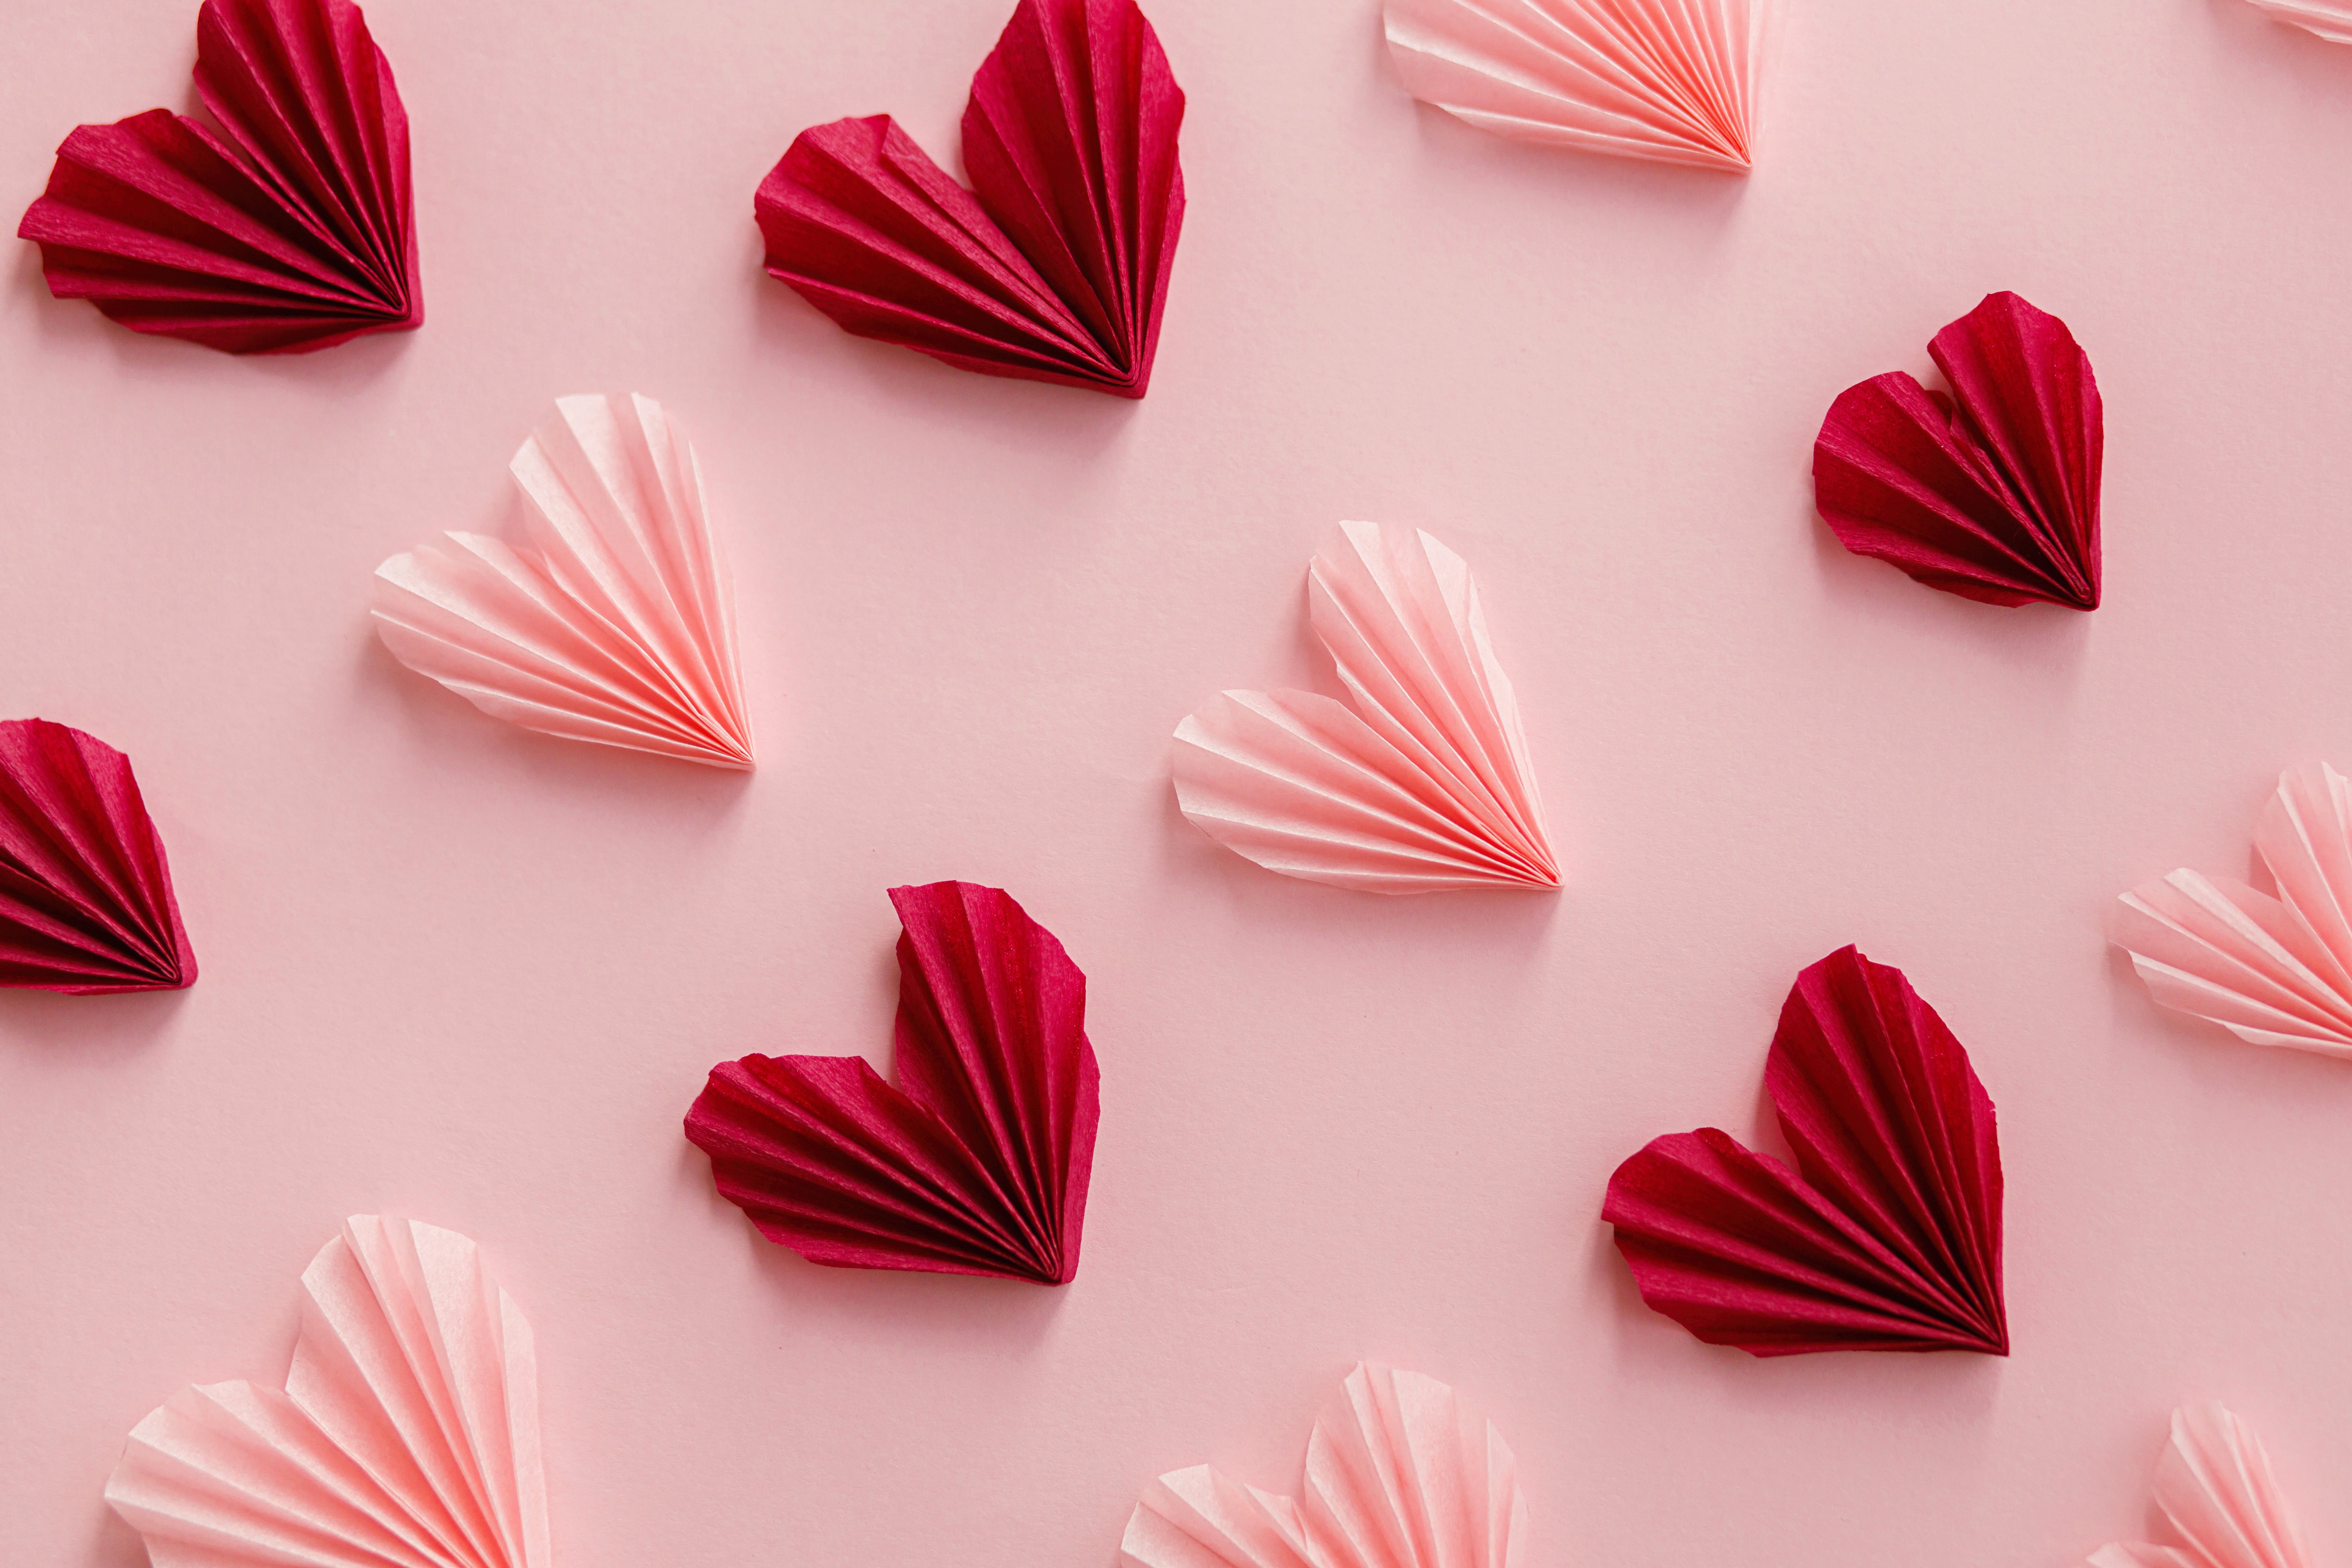 Featured image: Origami hearts in pink and red - Read full post: Lost the spark with your MSP? 8 things to look for in an IT partner.